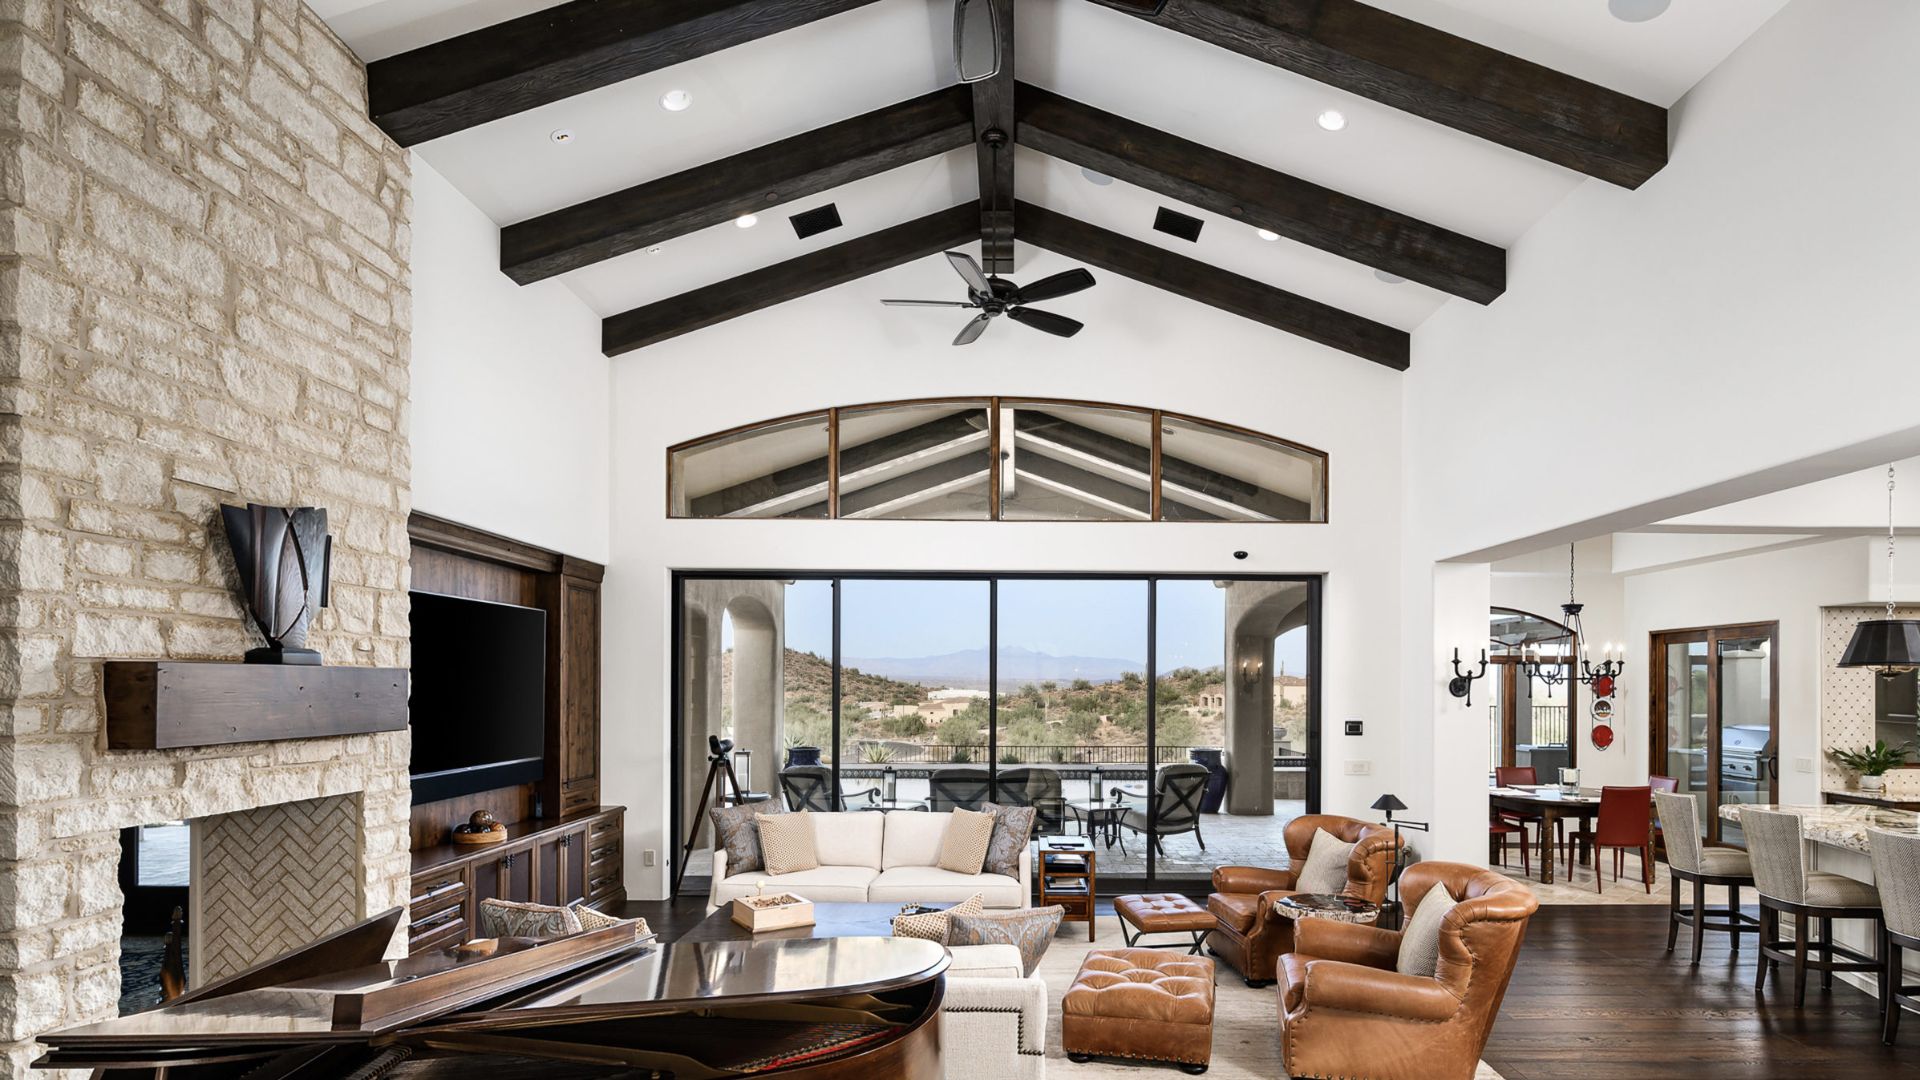 grand living room with faux wood beams